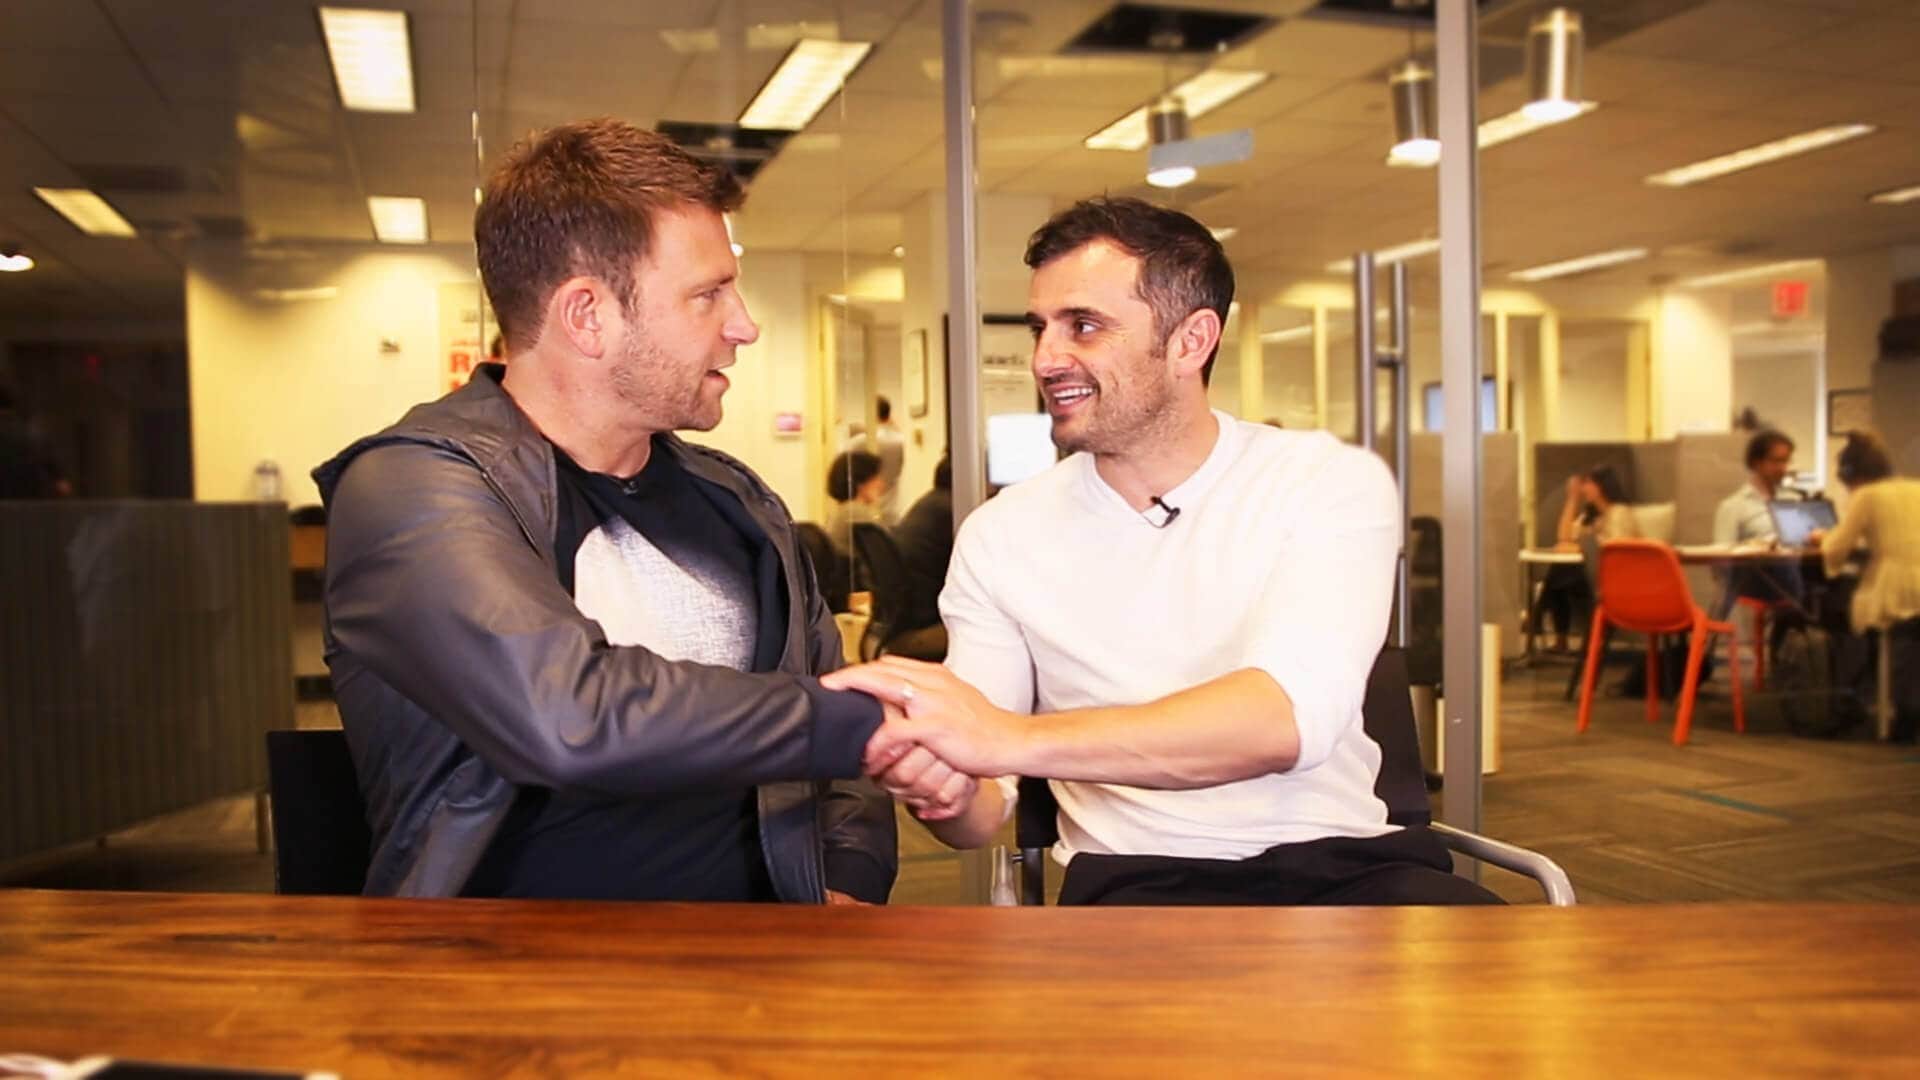 #AskGaryVee Episode 154: Chase Jarvis Answers Questions on the Show